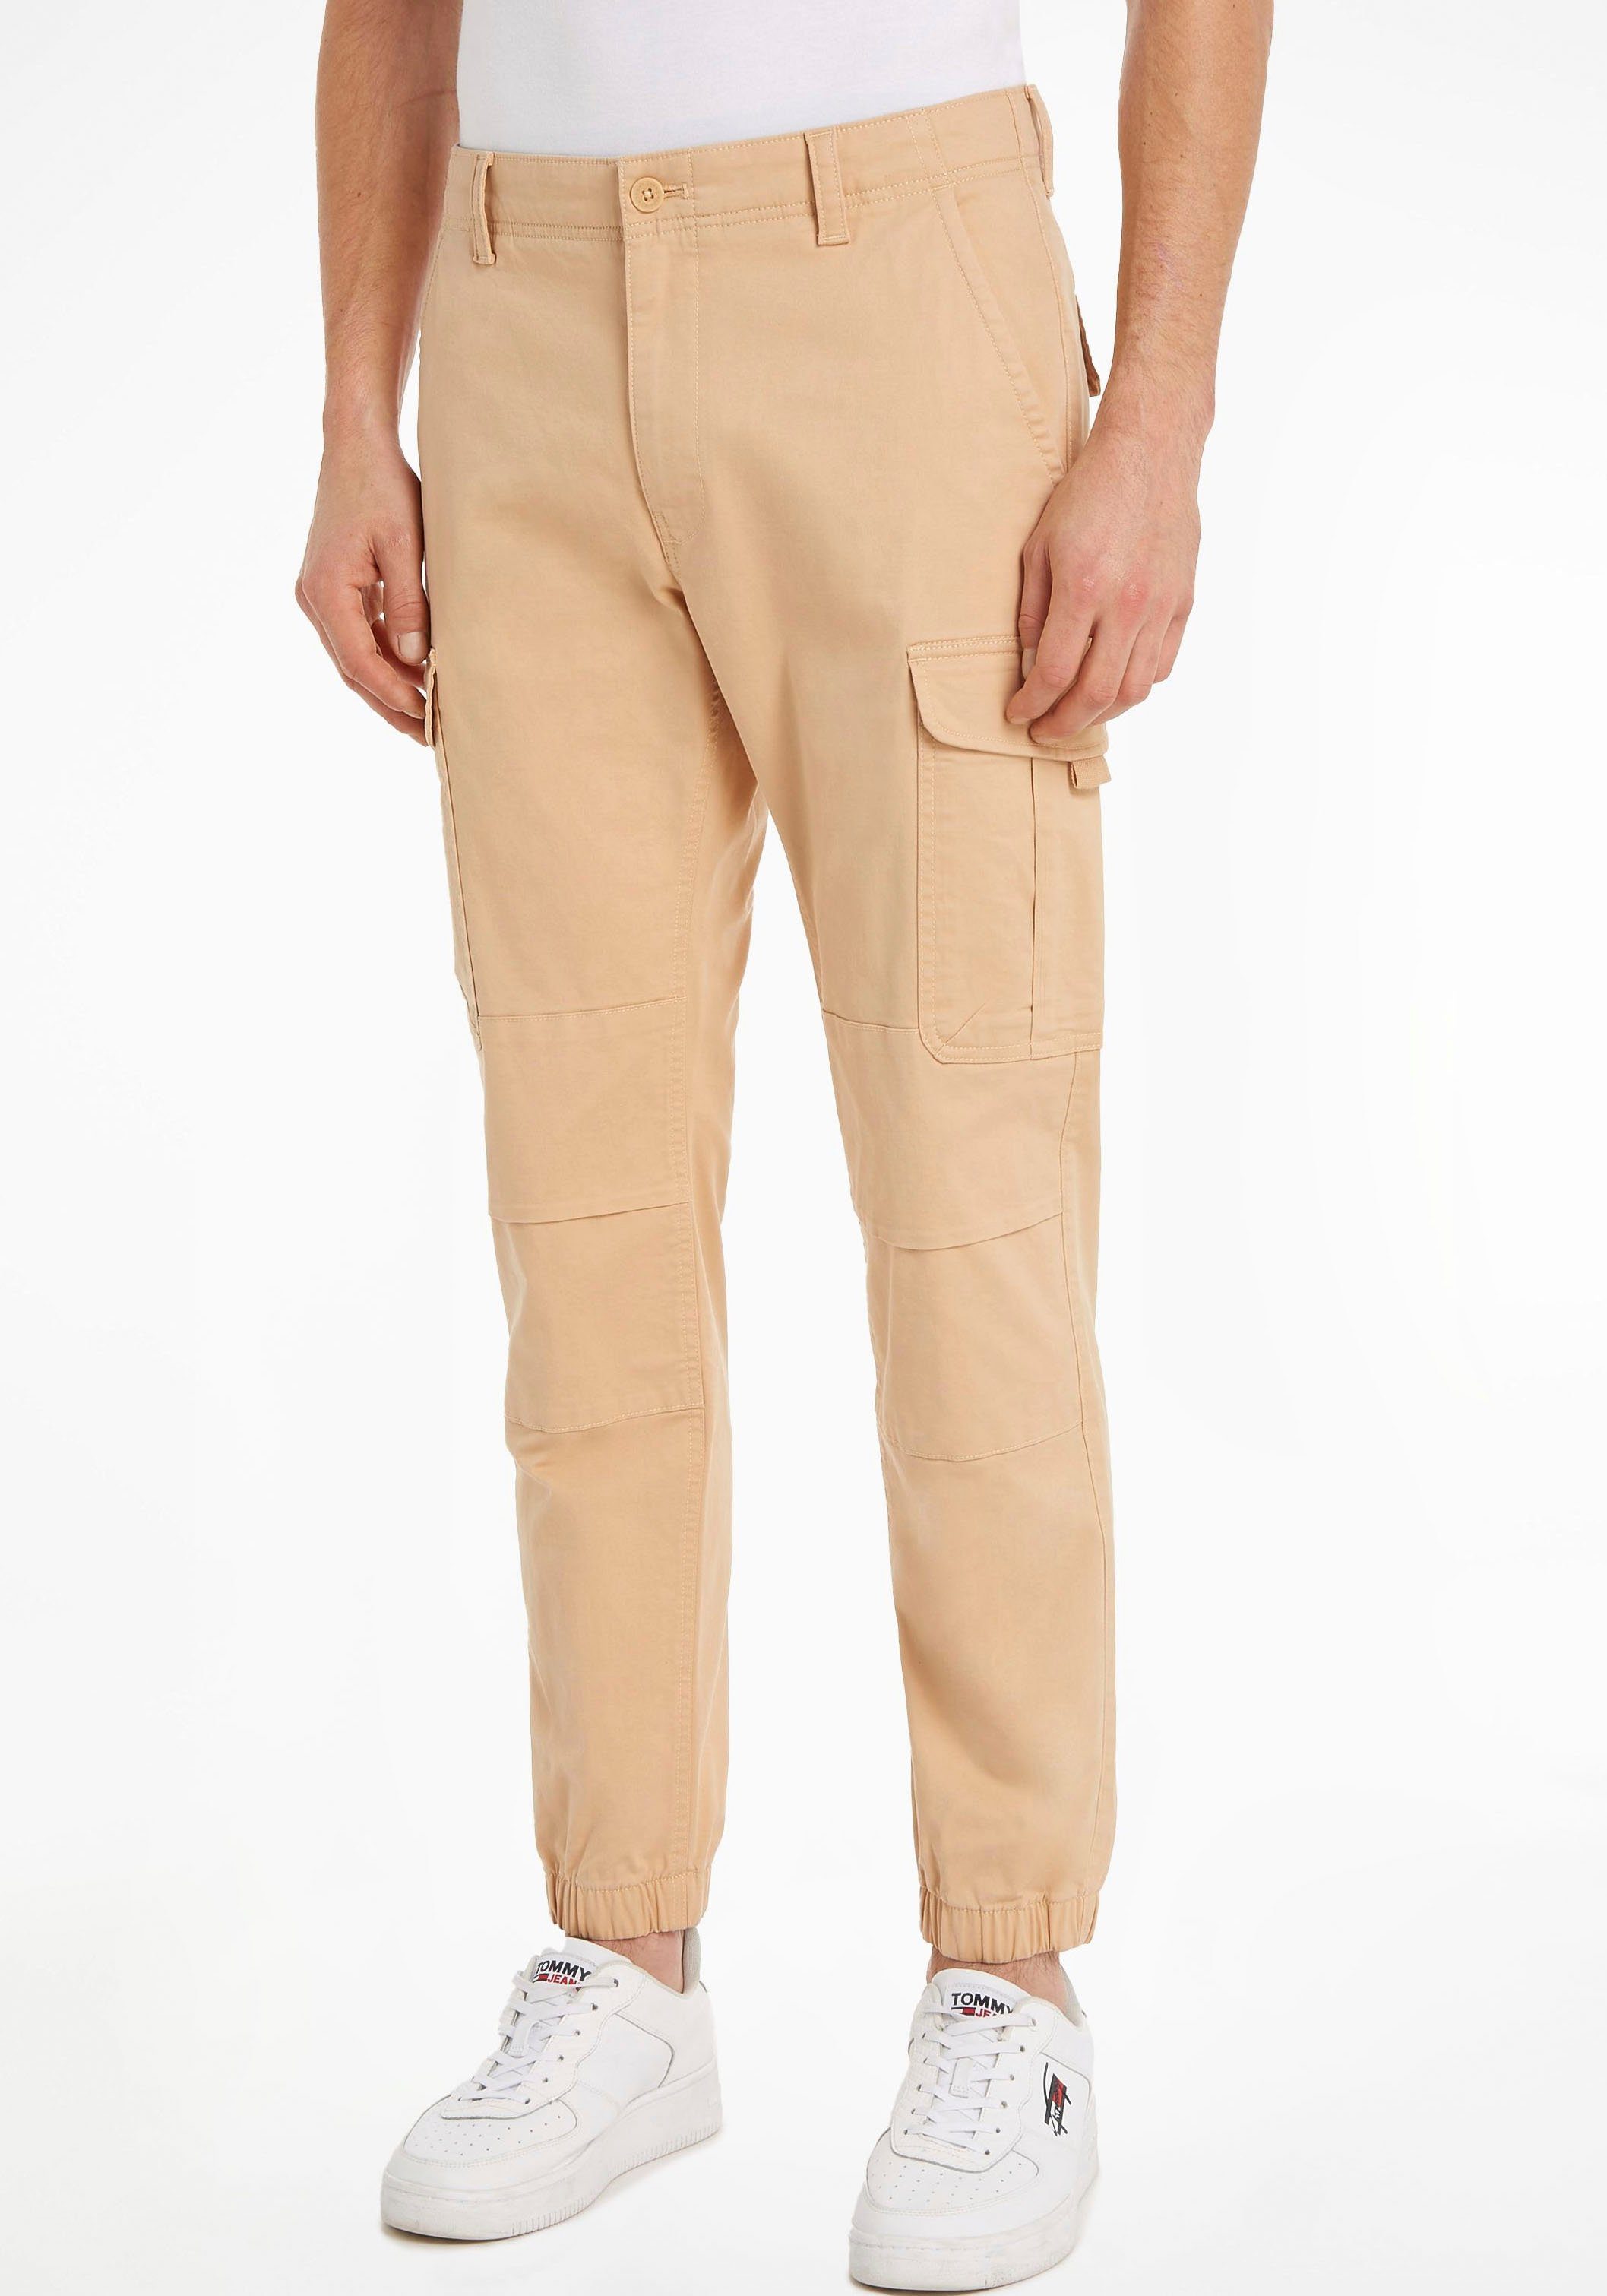 Tommy Jeans Cargohose TJM ETHAN WASHED TWILL CARGO mit Bindebändern Trench